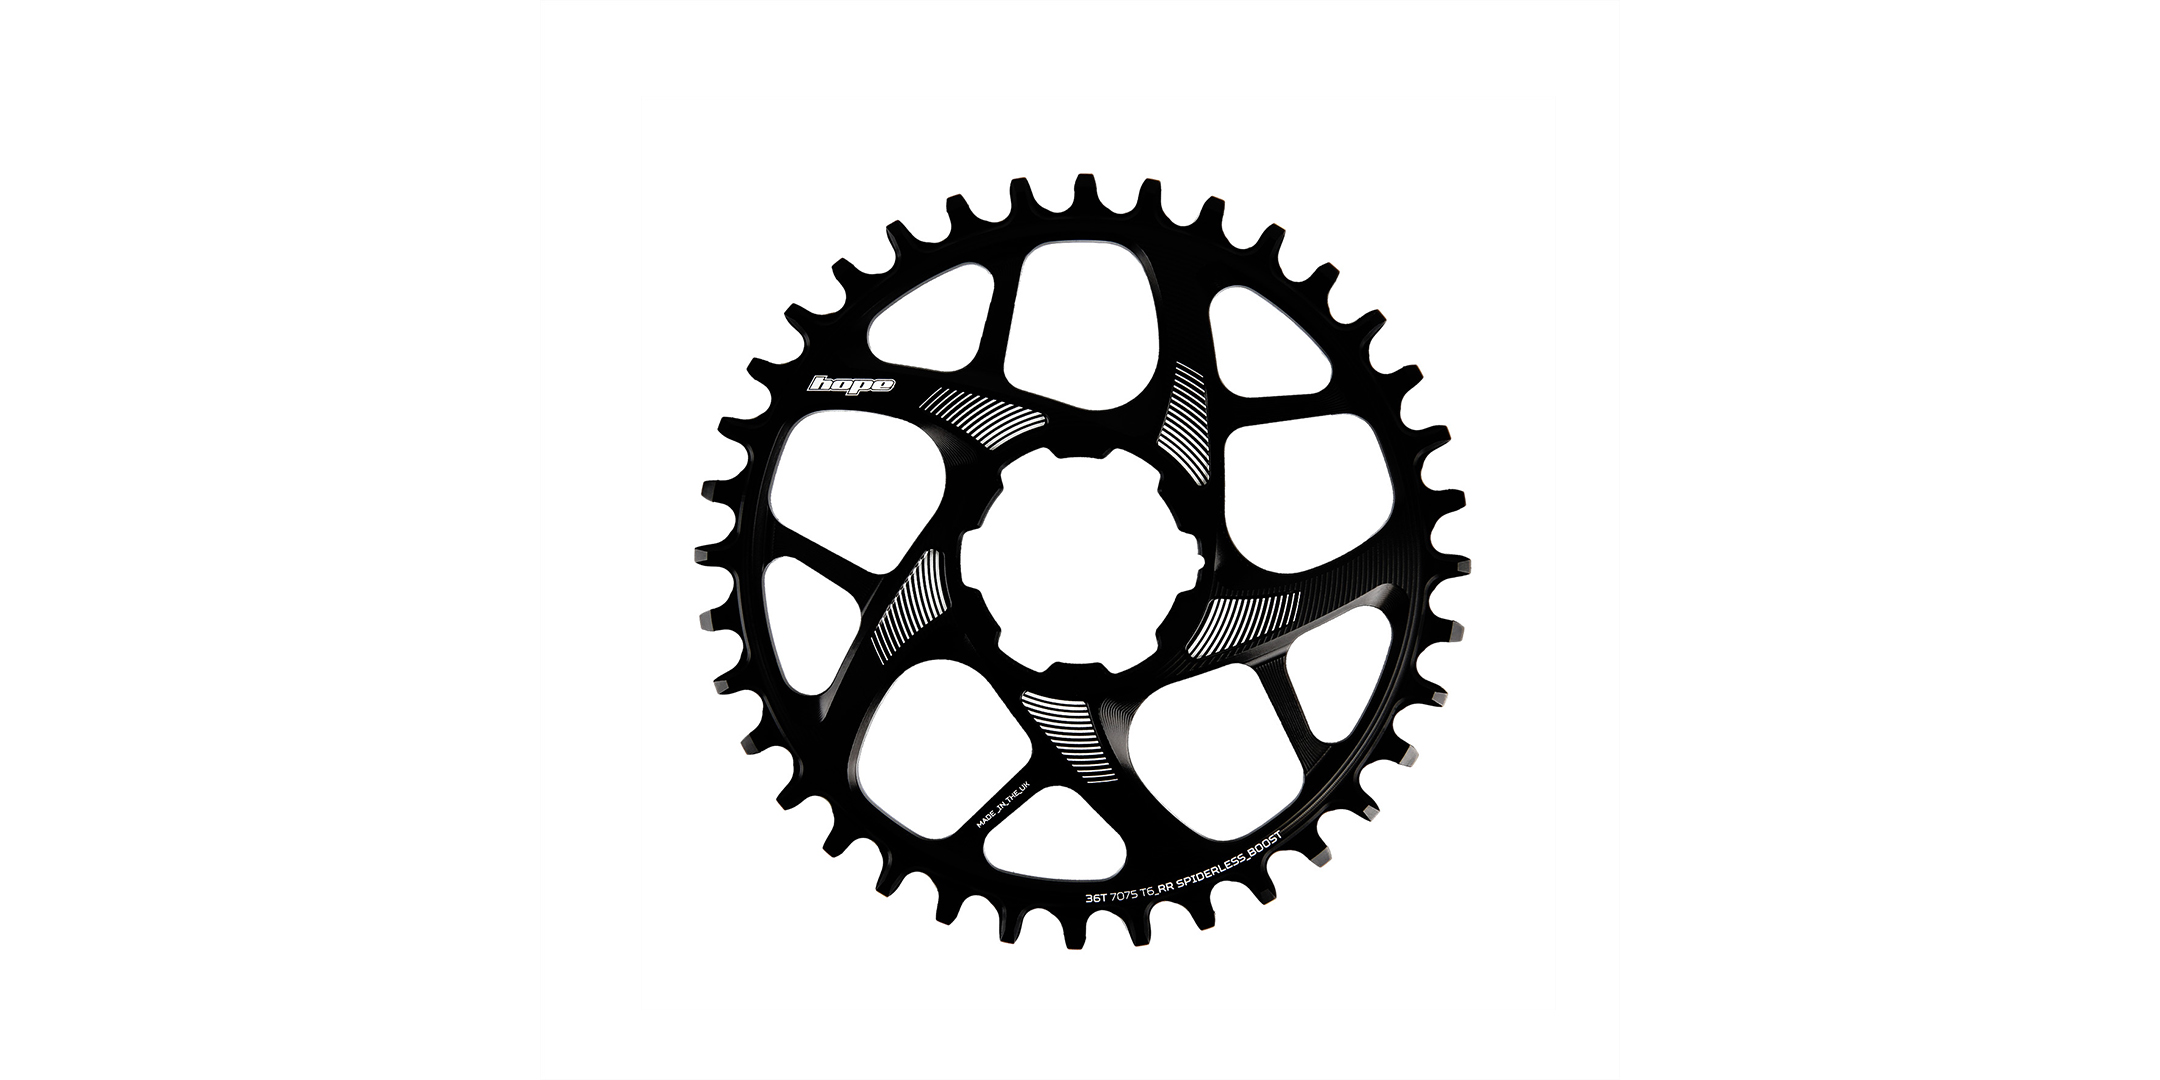 David Golay reviews the Hope R22 Chainring for BLISTER.